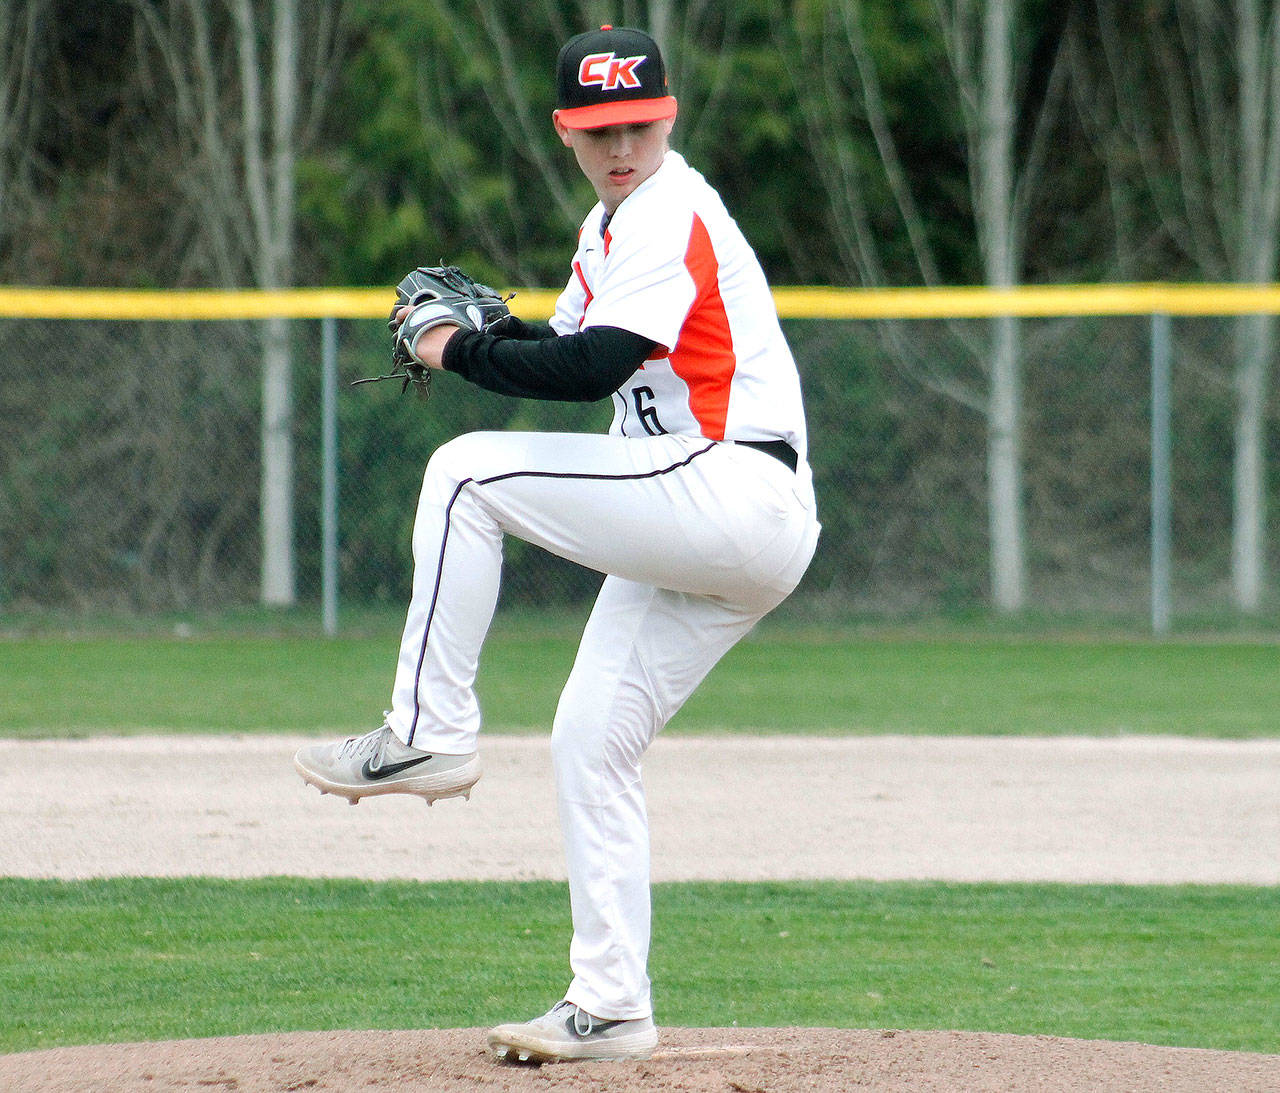 Greyson McCormick went 4-3 for Central Kitsap with a 2.63 ERA and was made a first-team South Sound Conference pick. (Mark Krulish/Kitsap News Group)